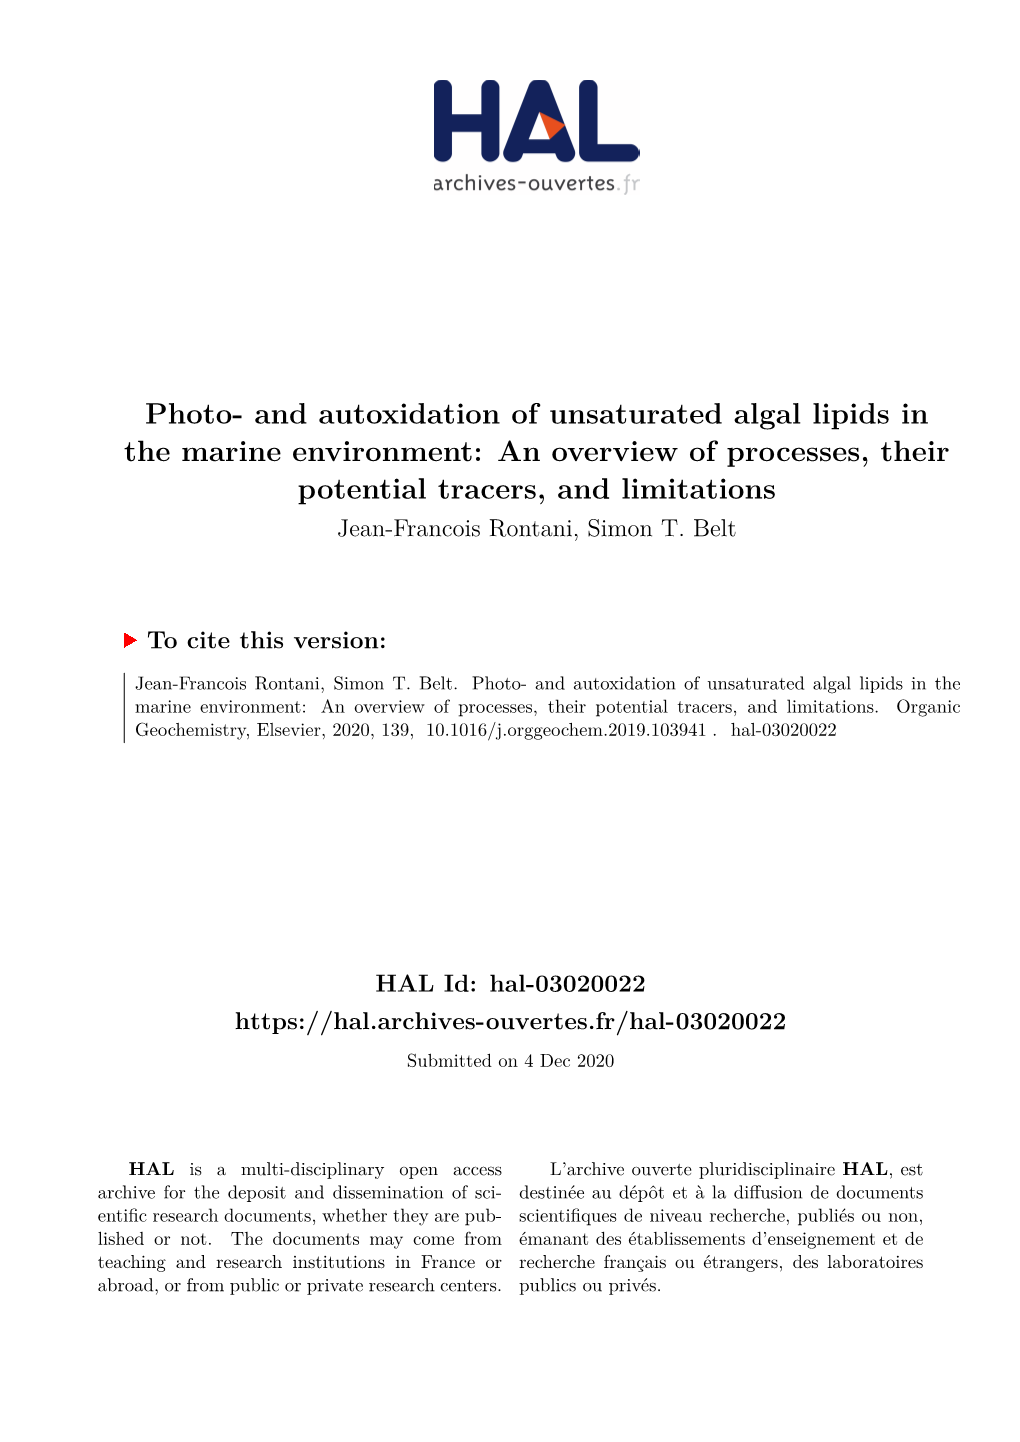 And Autoxidation of Unsaturated Algal Lipids in the Marine Environment